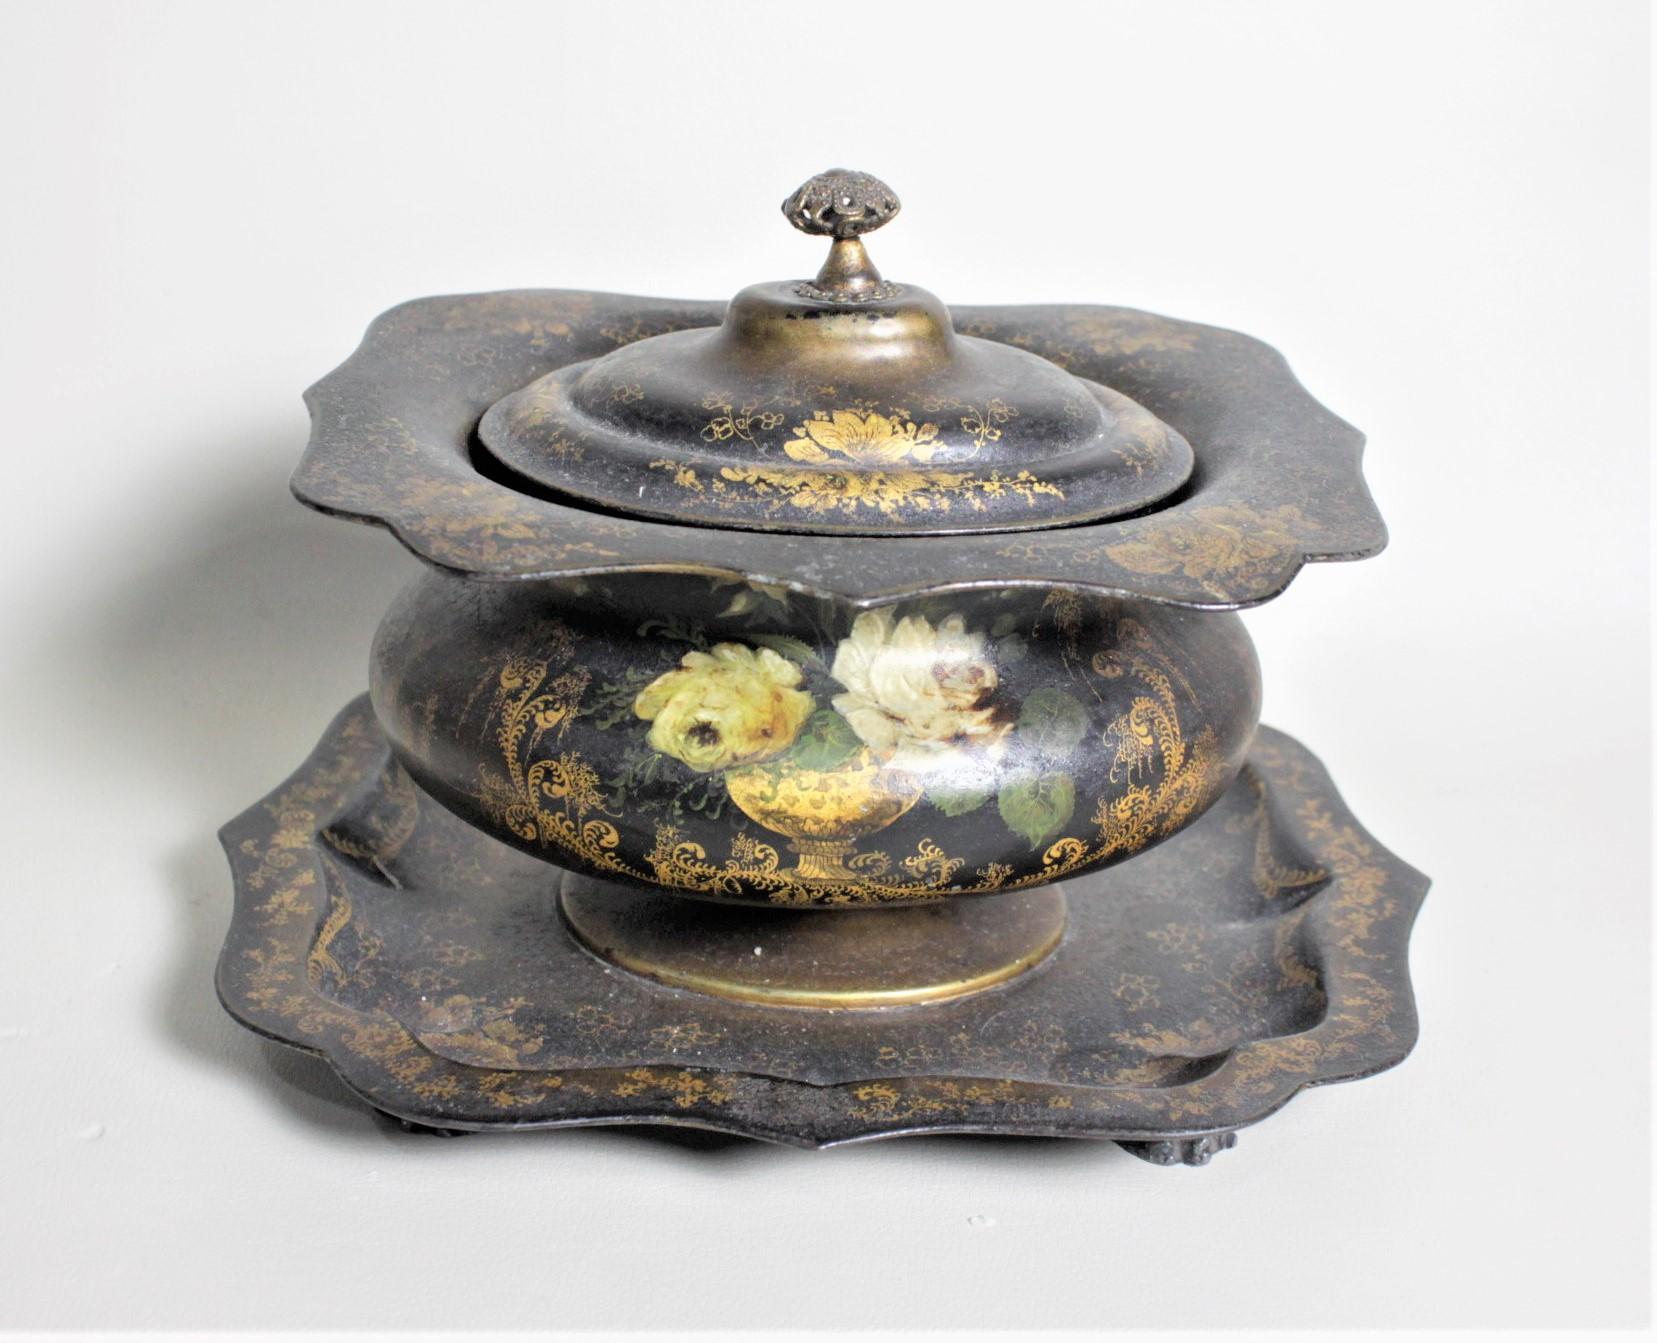 This antique English toleware tea caddy dates to circa 1820 and done in the period Regency style. This tea caddy is constructed of tin with a cast iron handled weight which functions as a manner to compress the tea. The body of the caddy is caldron